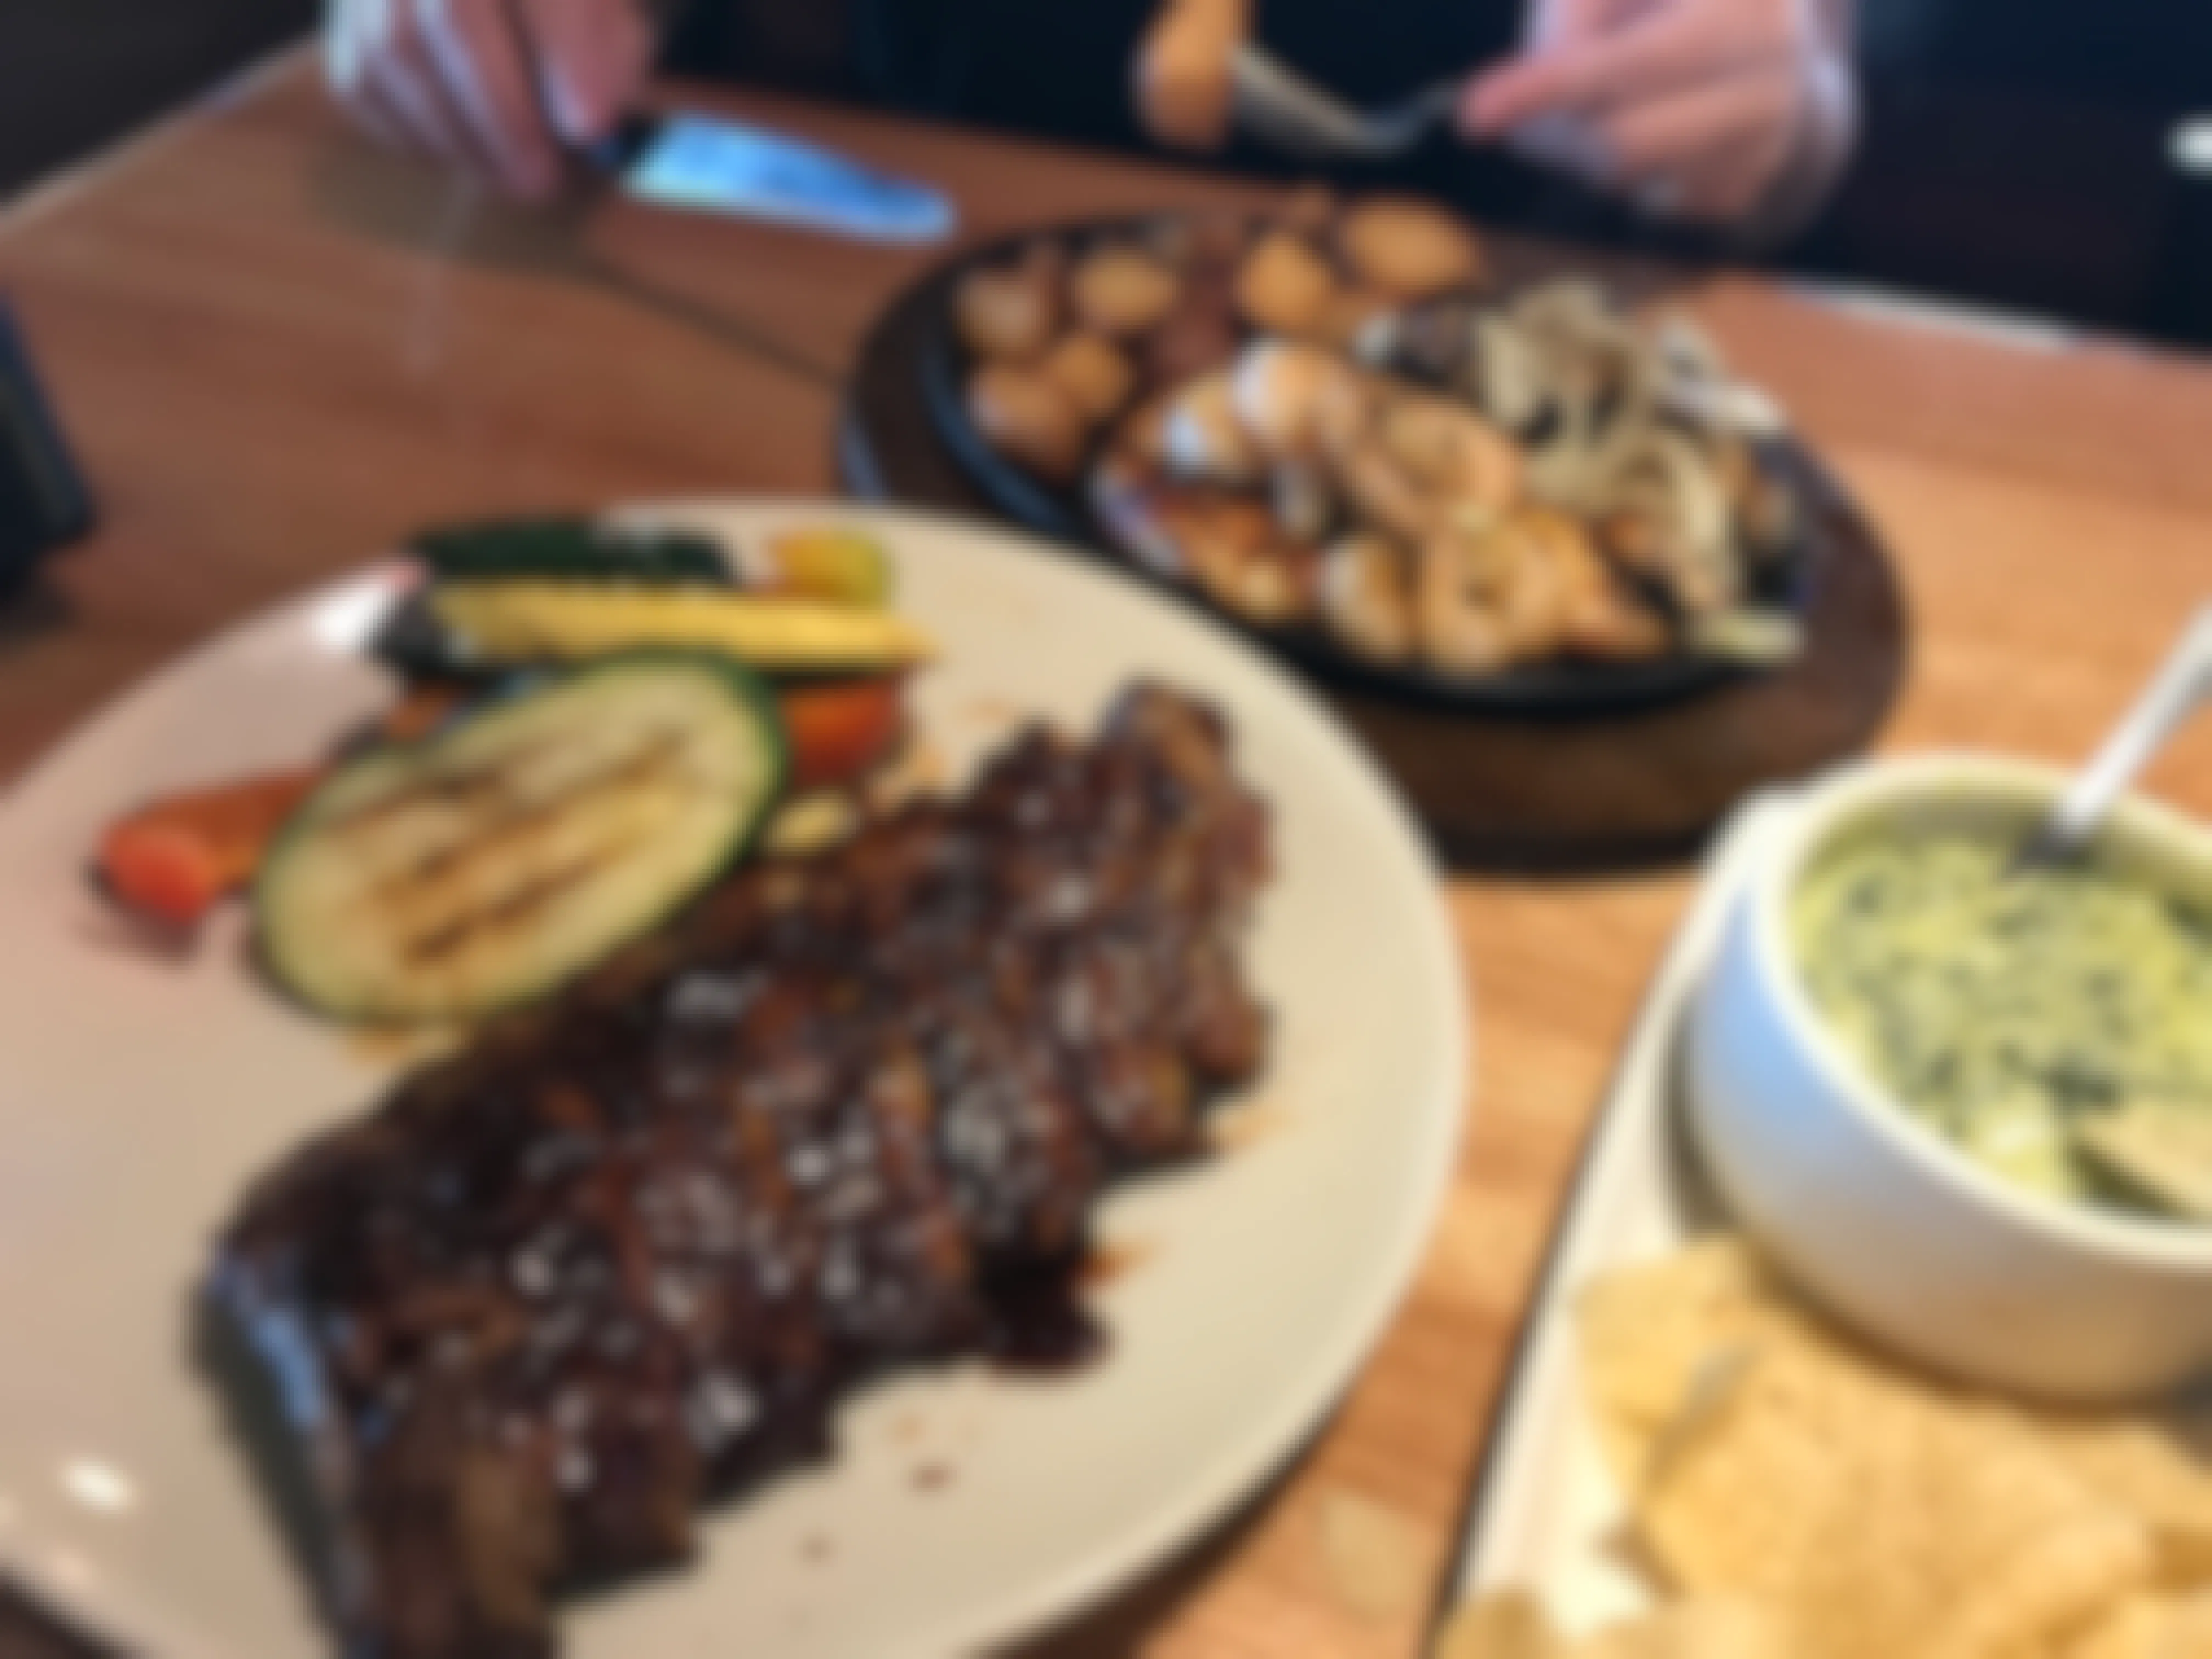 A plate of ribs and vegetables on a table next to a skillet plate of shrimp, chicken, potatoes, and onions, and another plate with a bowl of spinach-artichoke dip and tortilla chips on a table at Applebee's.